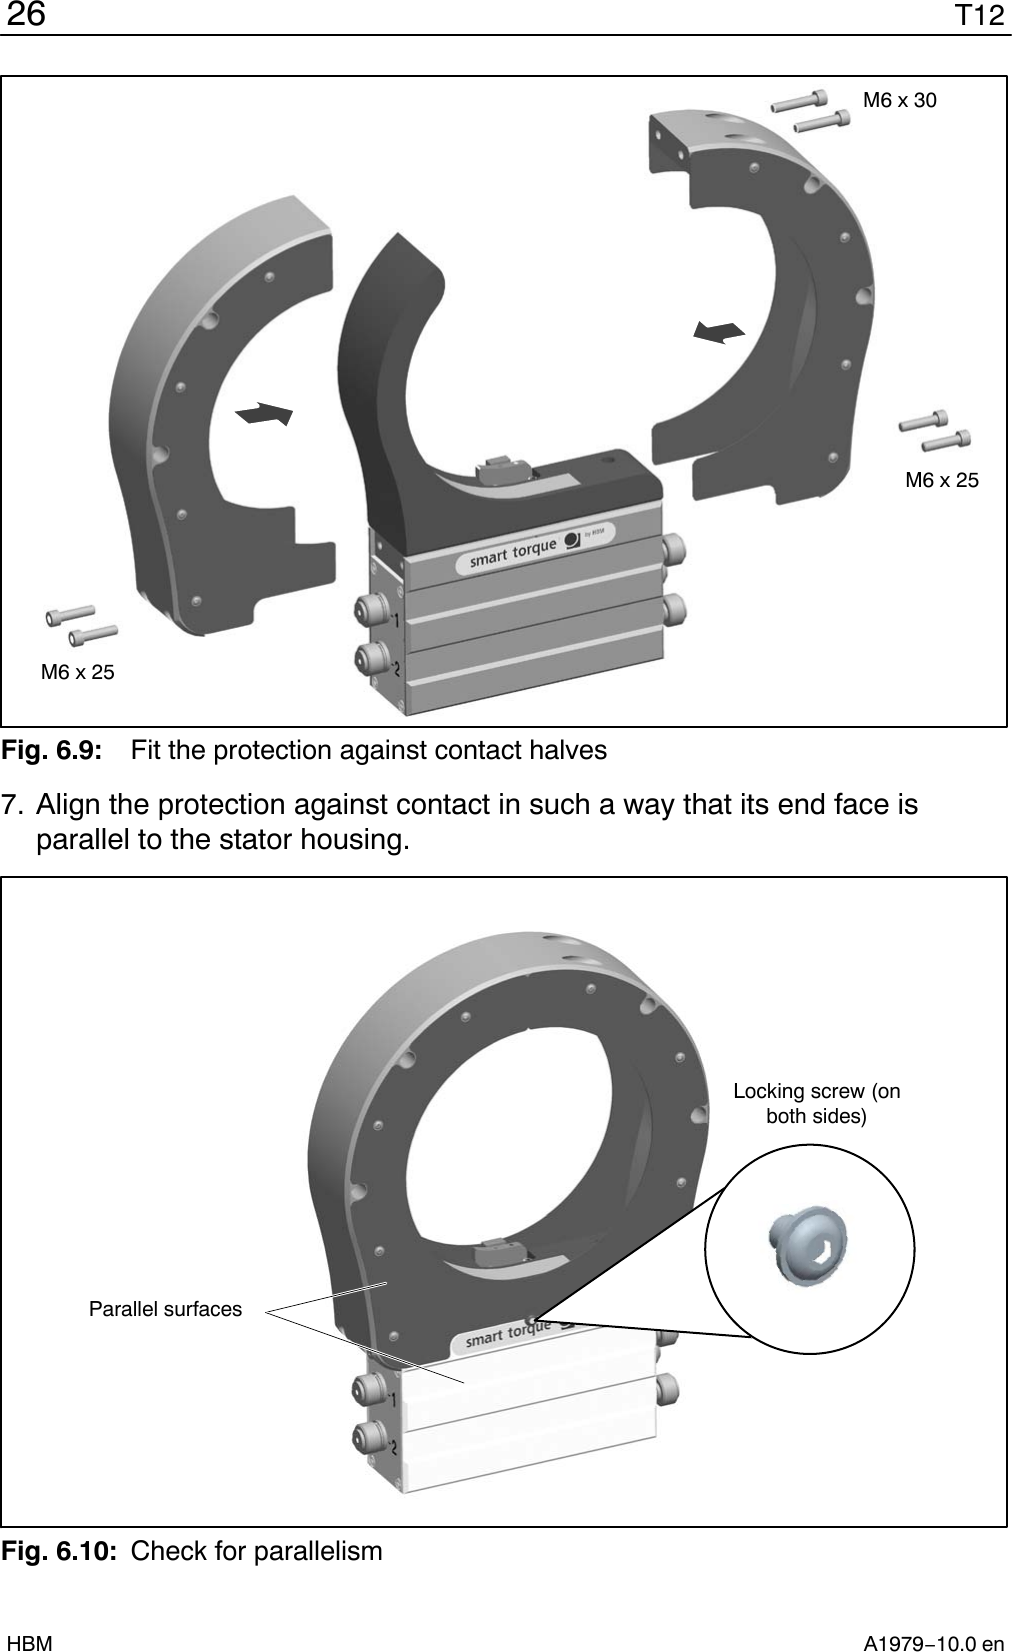 T1226A1979−10.0 enHBMM6 x 30M6 x 25M6 x 25Fig. 6.9: Fit the protection against contact halves7. Align the protection against contact in such a way that its end face isparallel to the stator housing.Parallel surfacesLocking screw (onboth sides)Fig. 6.10: Check for parallelism